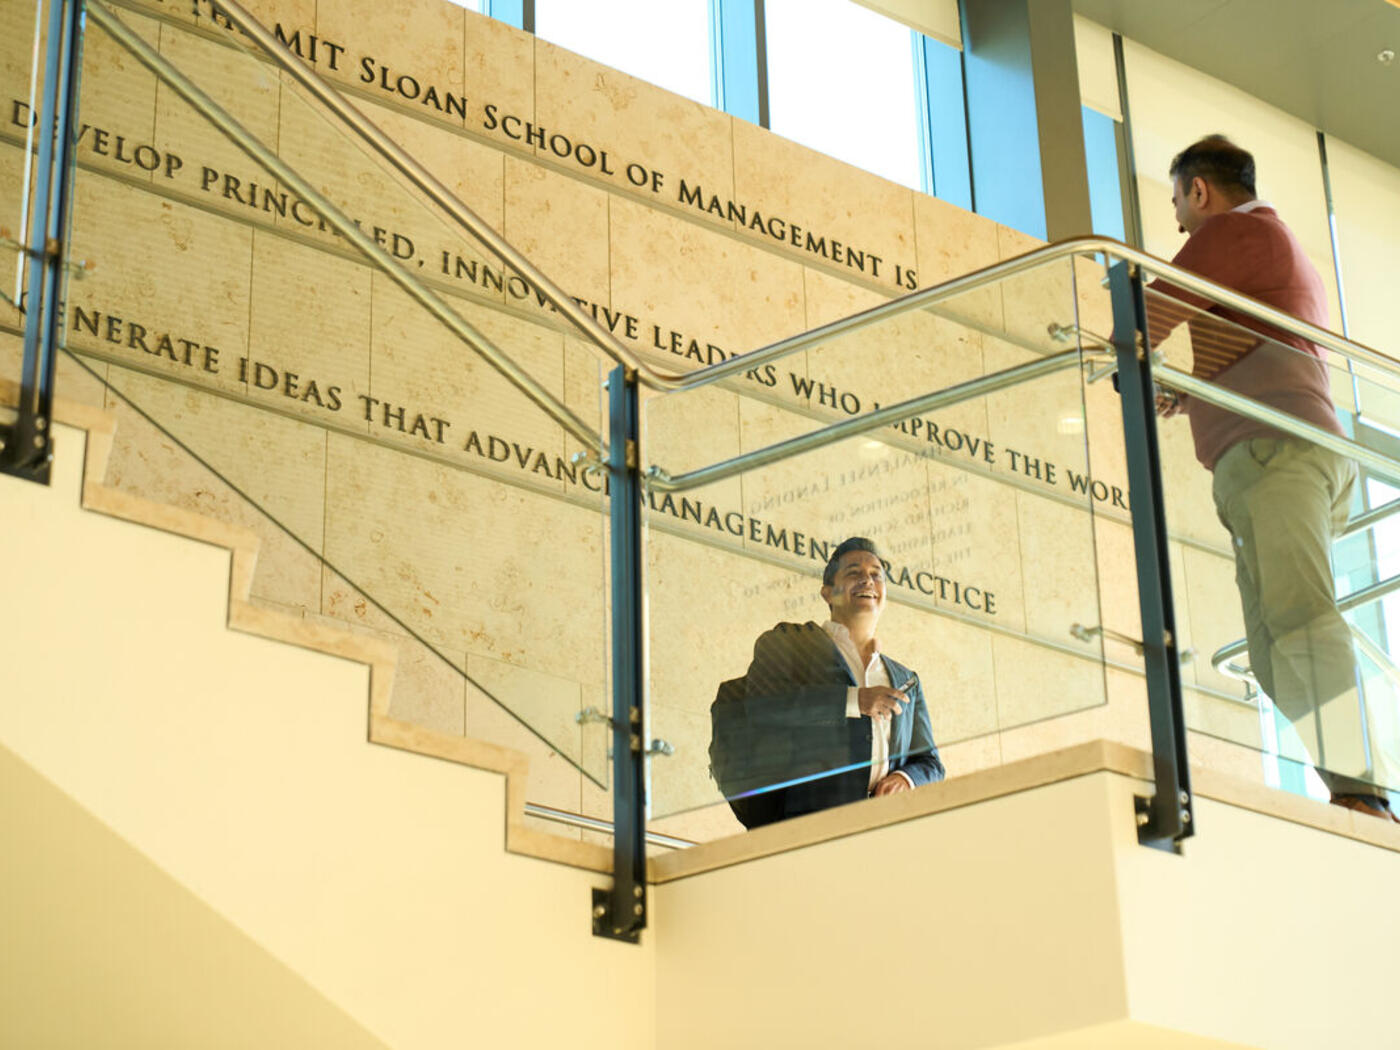 Students on staircase in E62 with MIT Sloan mission written on the wall in the background: THE MISSION The mission of the MIT Sloan School of Management is to develop principled, innovative leaders who improve the world and to generate ideas that advance management practice.